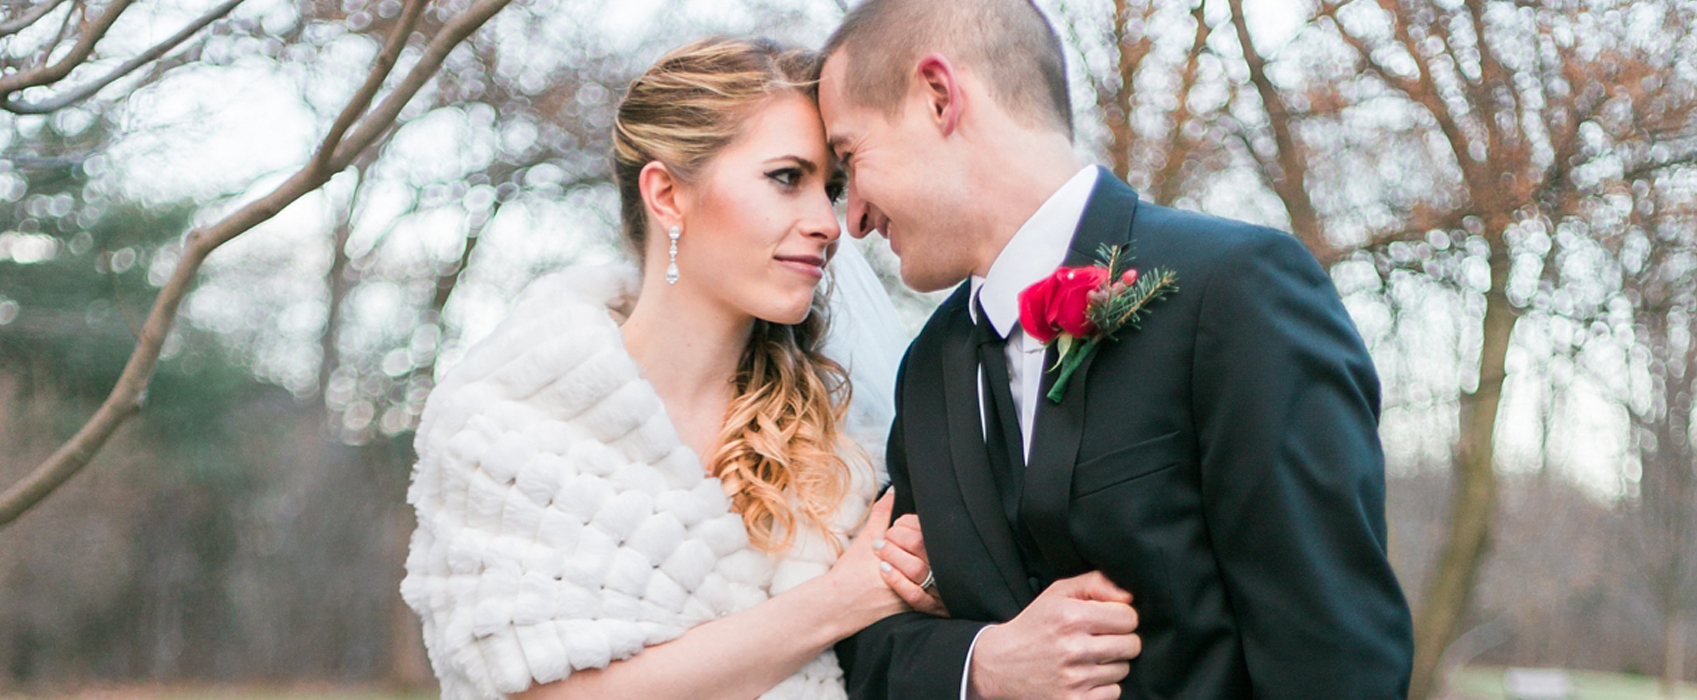 New Jersey Bride magazine feature anne molnar photography publication enchanting winter wedding bride and groom linking arms looking into each others eyes red rose and white rabbit fur stole